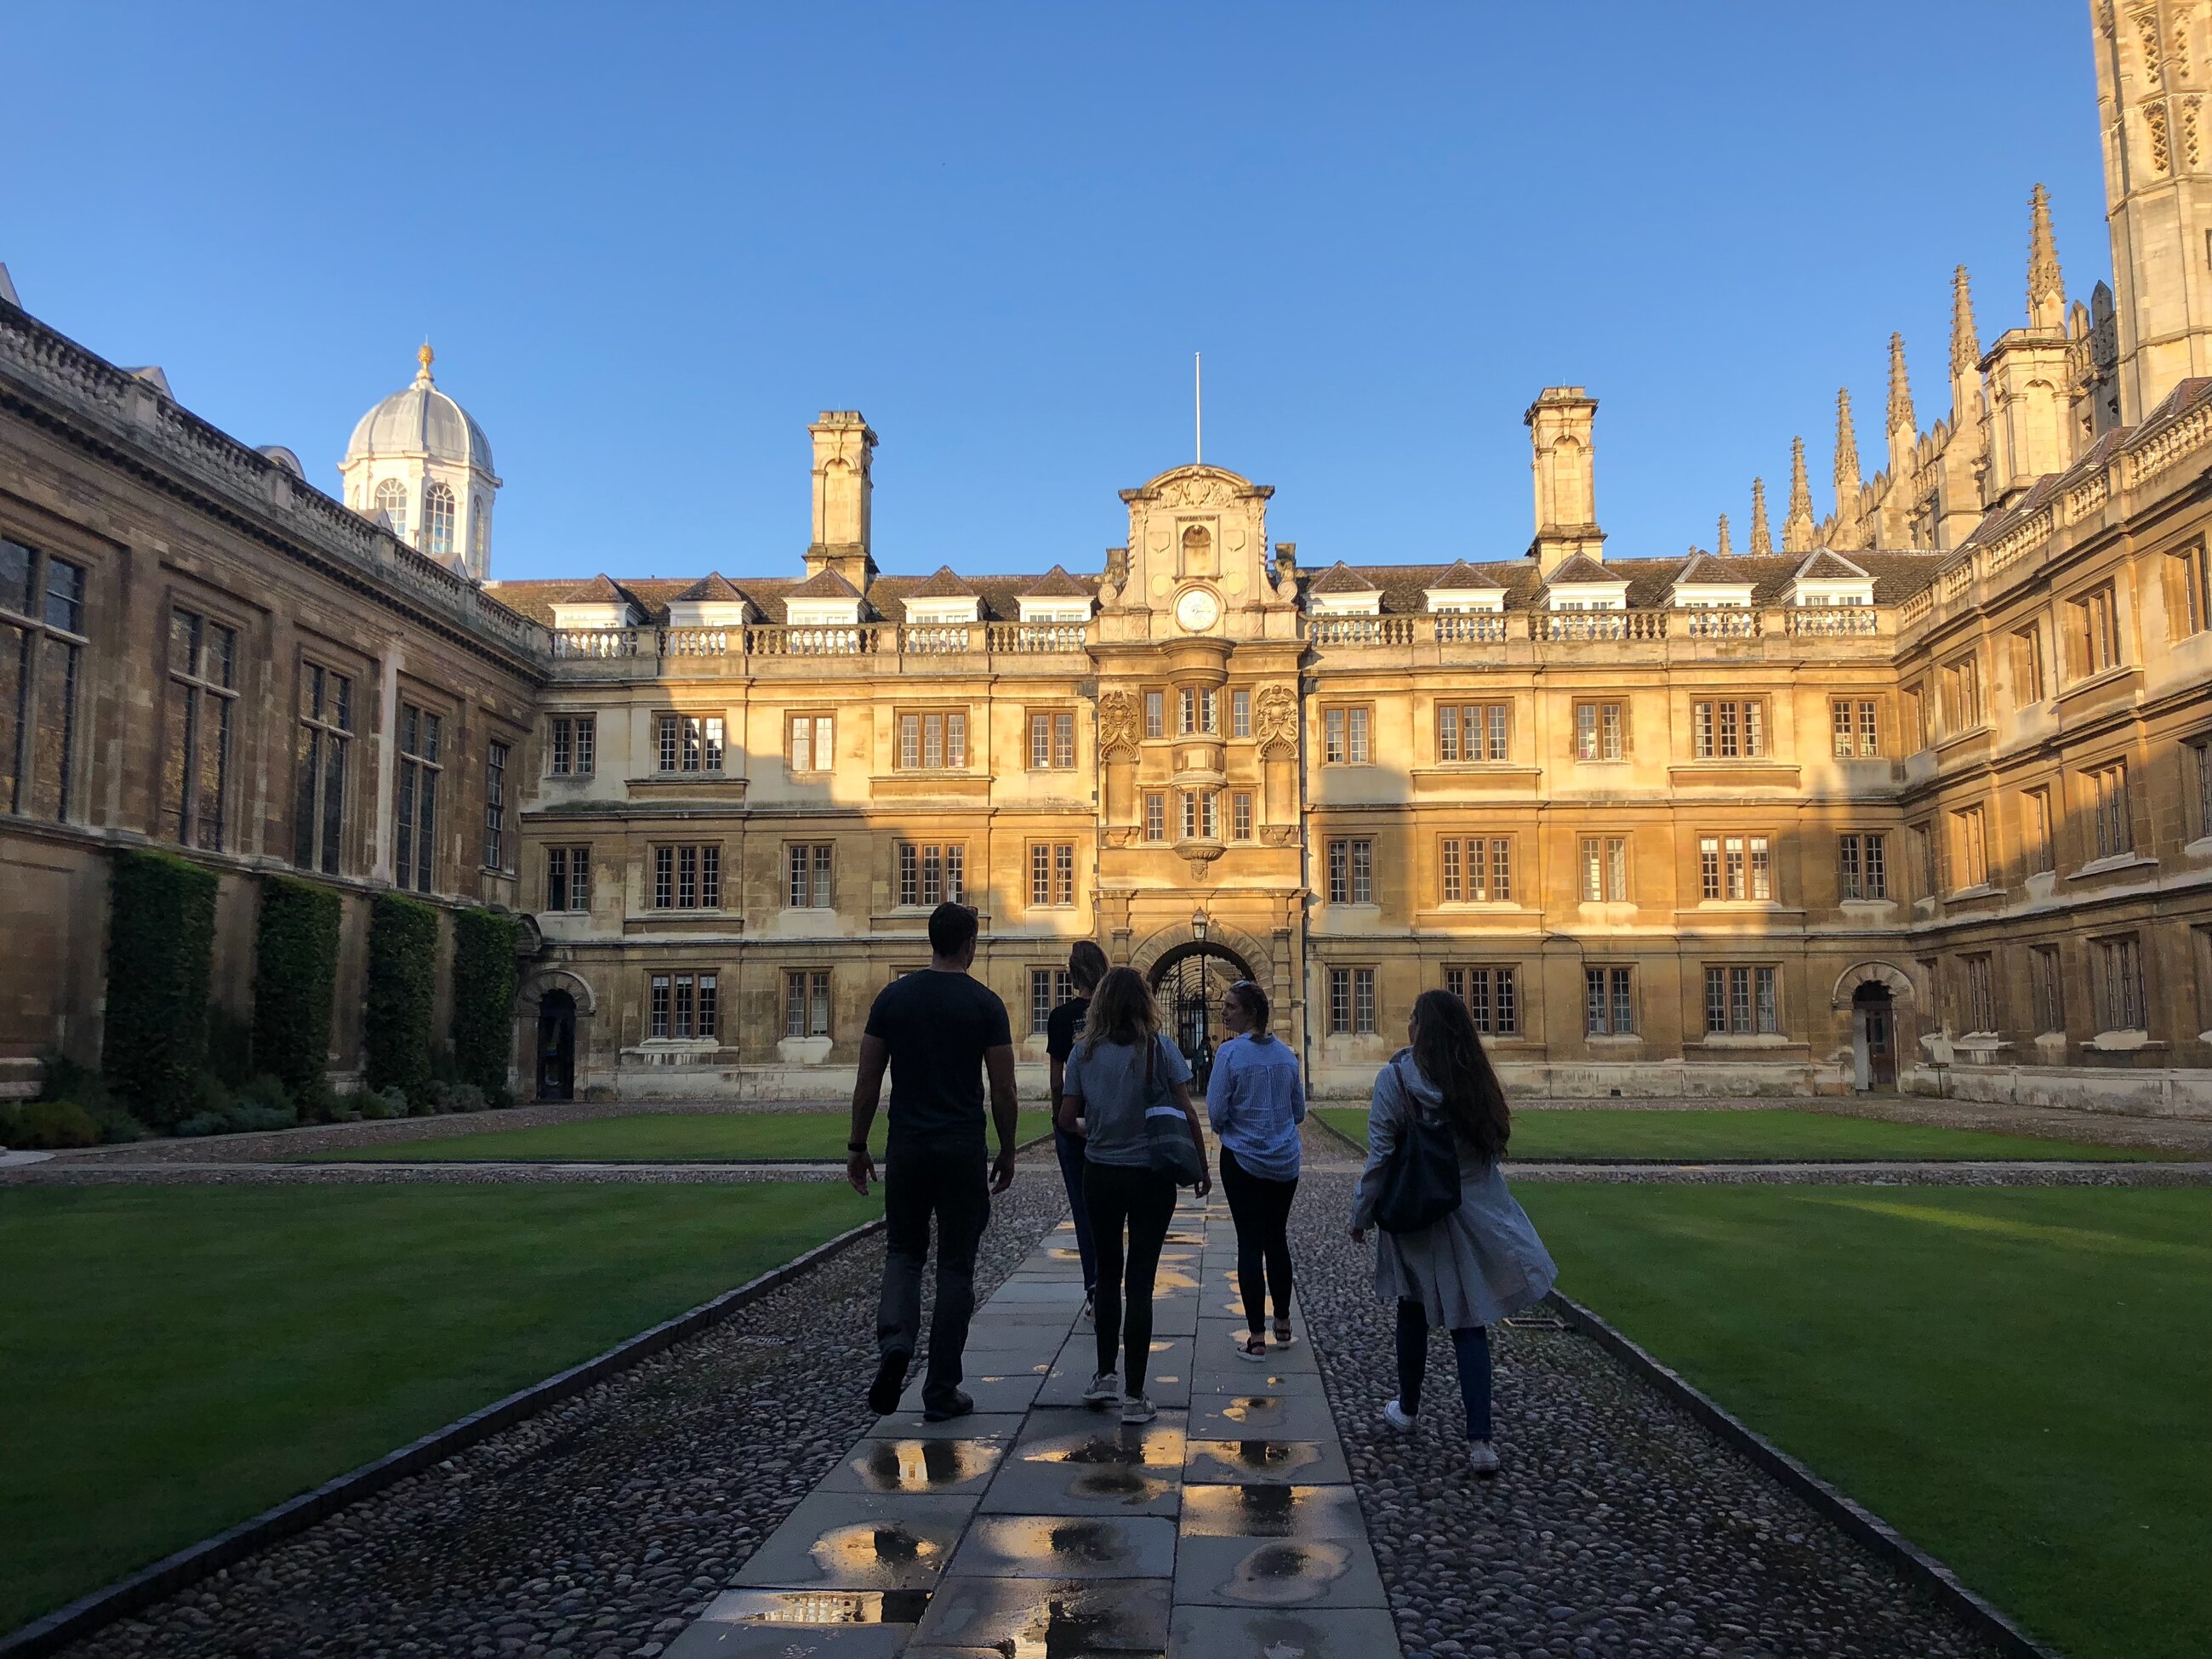 Walking from the dorms to the dining hall at Clare College